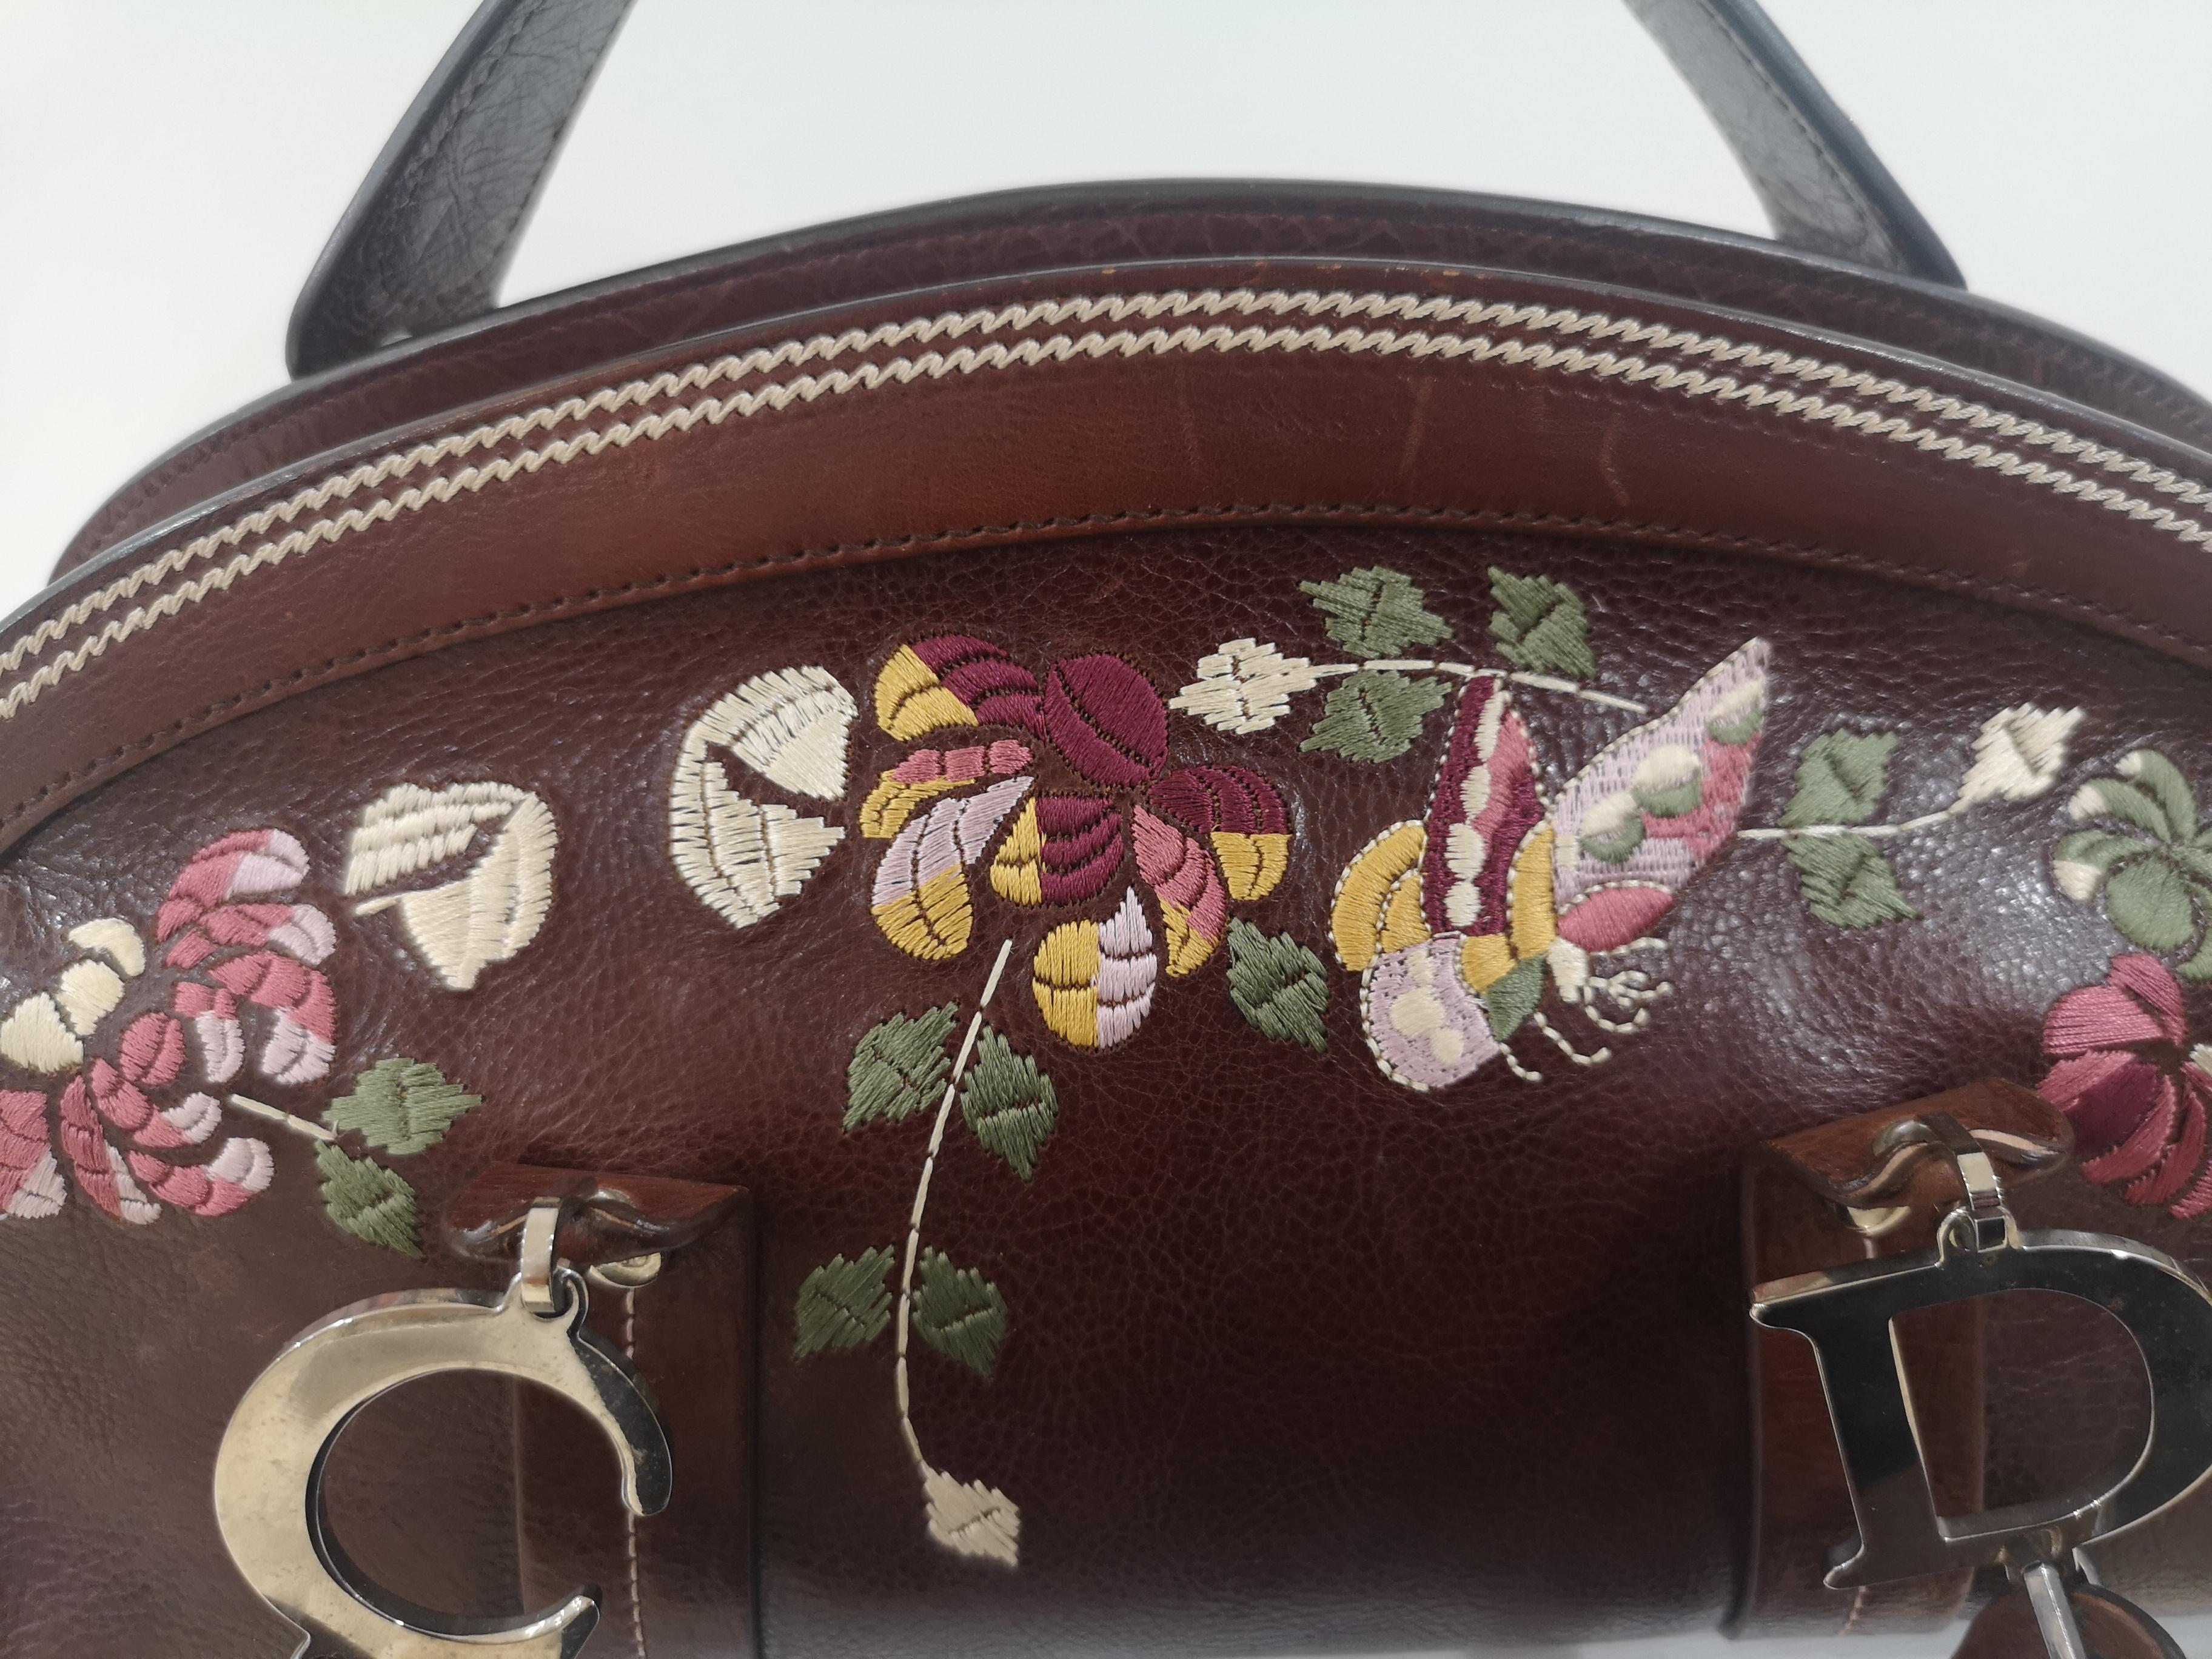 Burnt red leather Christian Dior handle bag with silver-tone hardware, multicolor floral embroidery at front, logo at handles, dual flat top handles featuring logo accents, chocolate brown Diorissimo canvas lining, single pocket with zip closure and